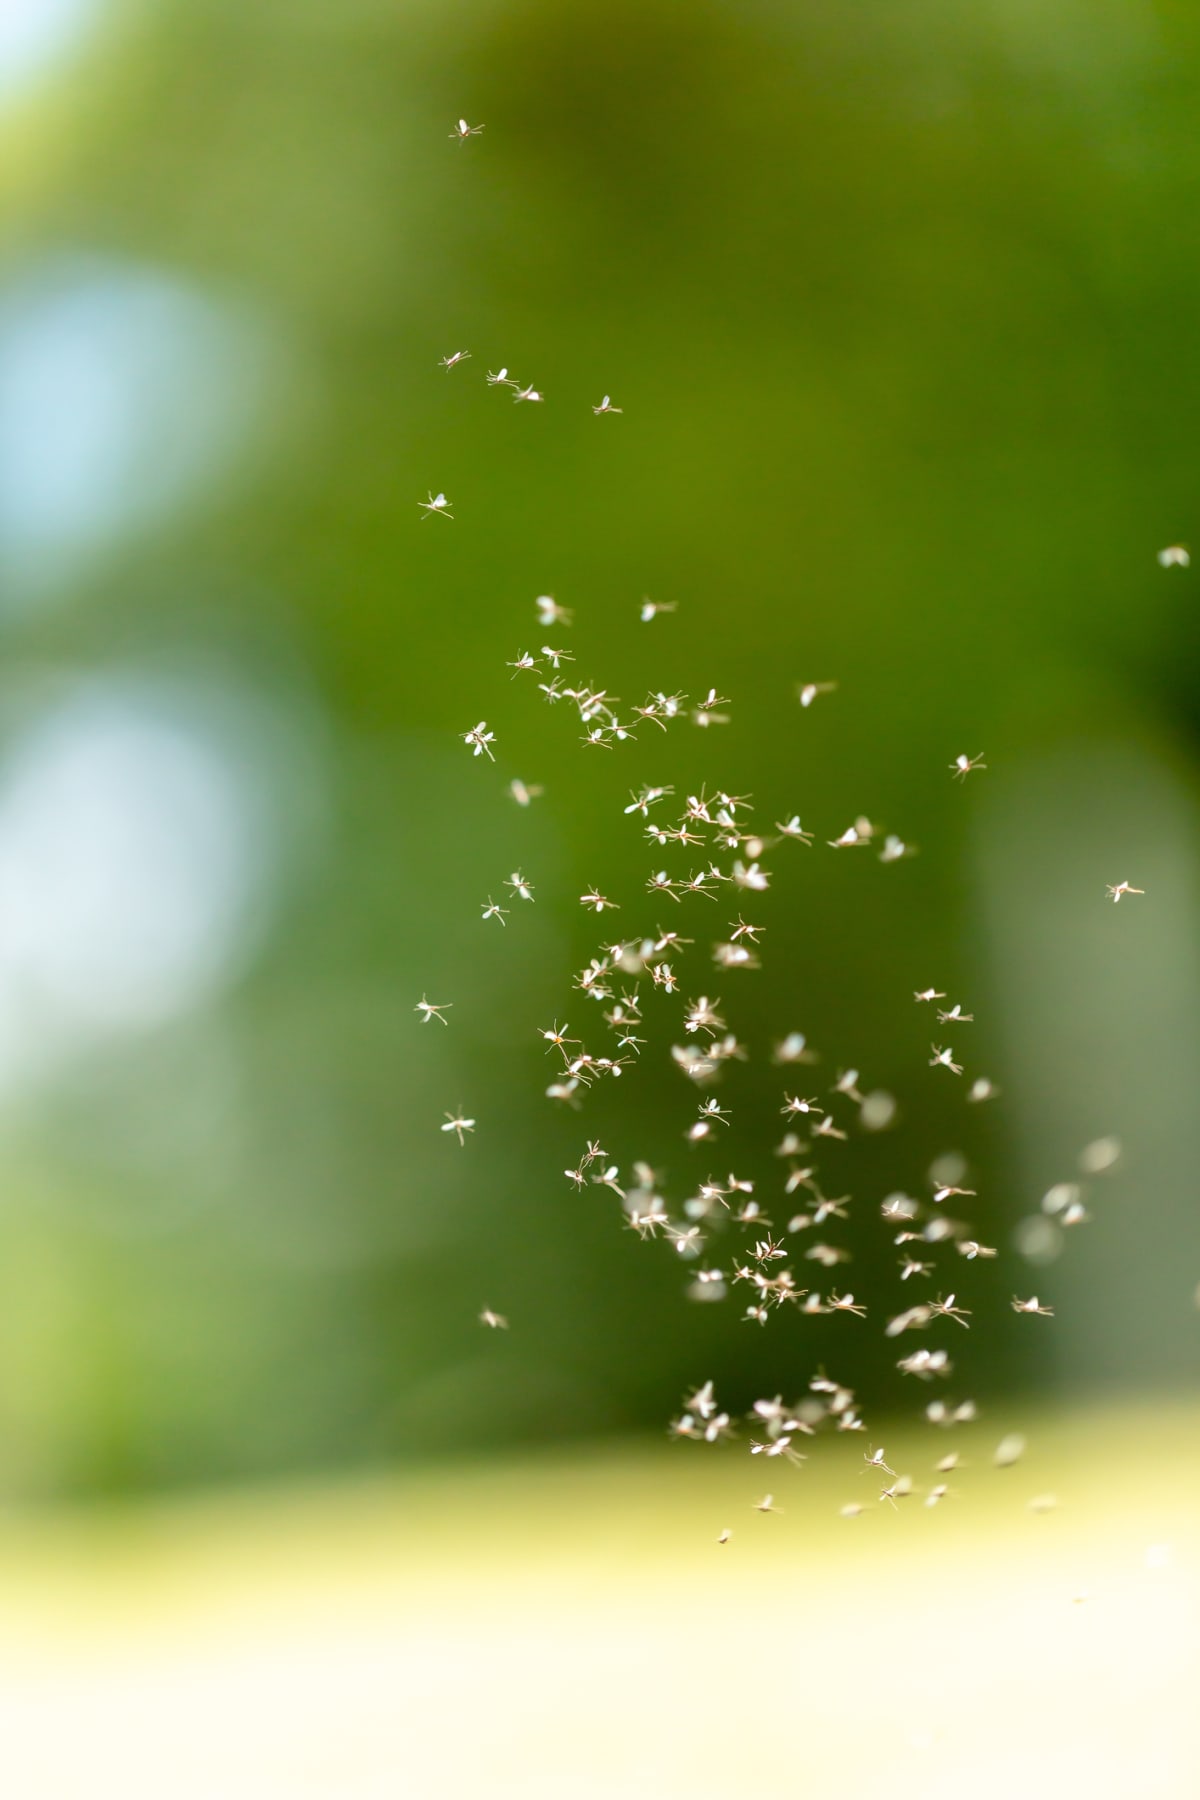 A swarm of gnats circling each other set against a green background